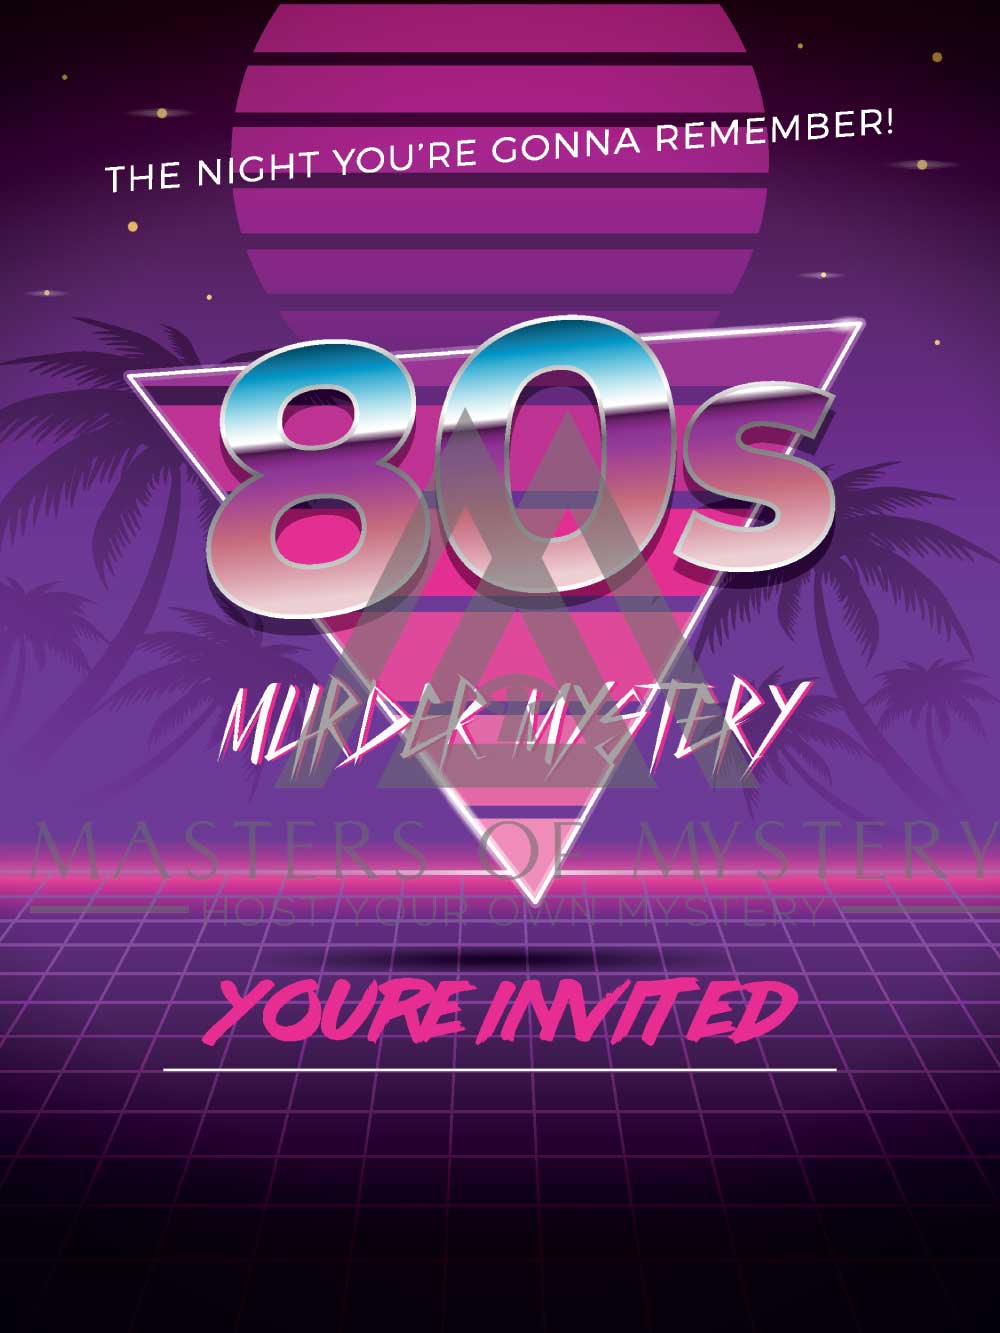  80s Mall Murder Madness, A Totally Tubular 1980s Themed Murder  Mystery Game, Flexible 4-20+ Players